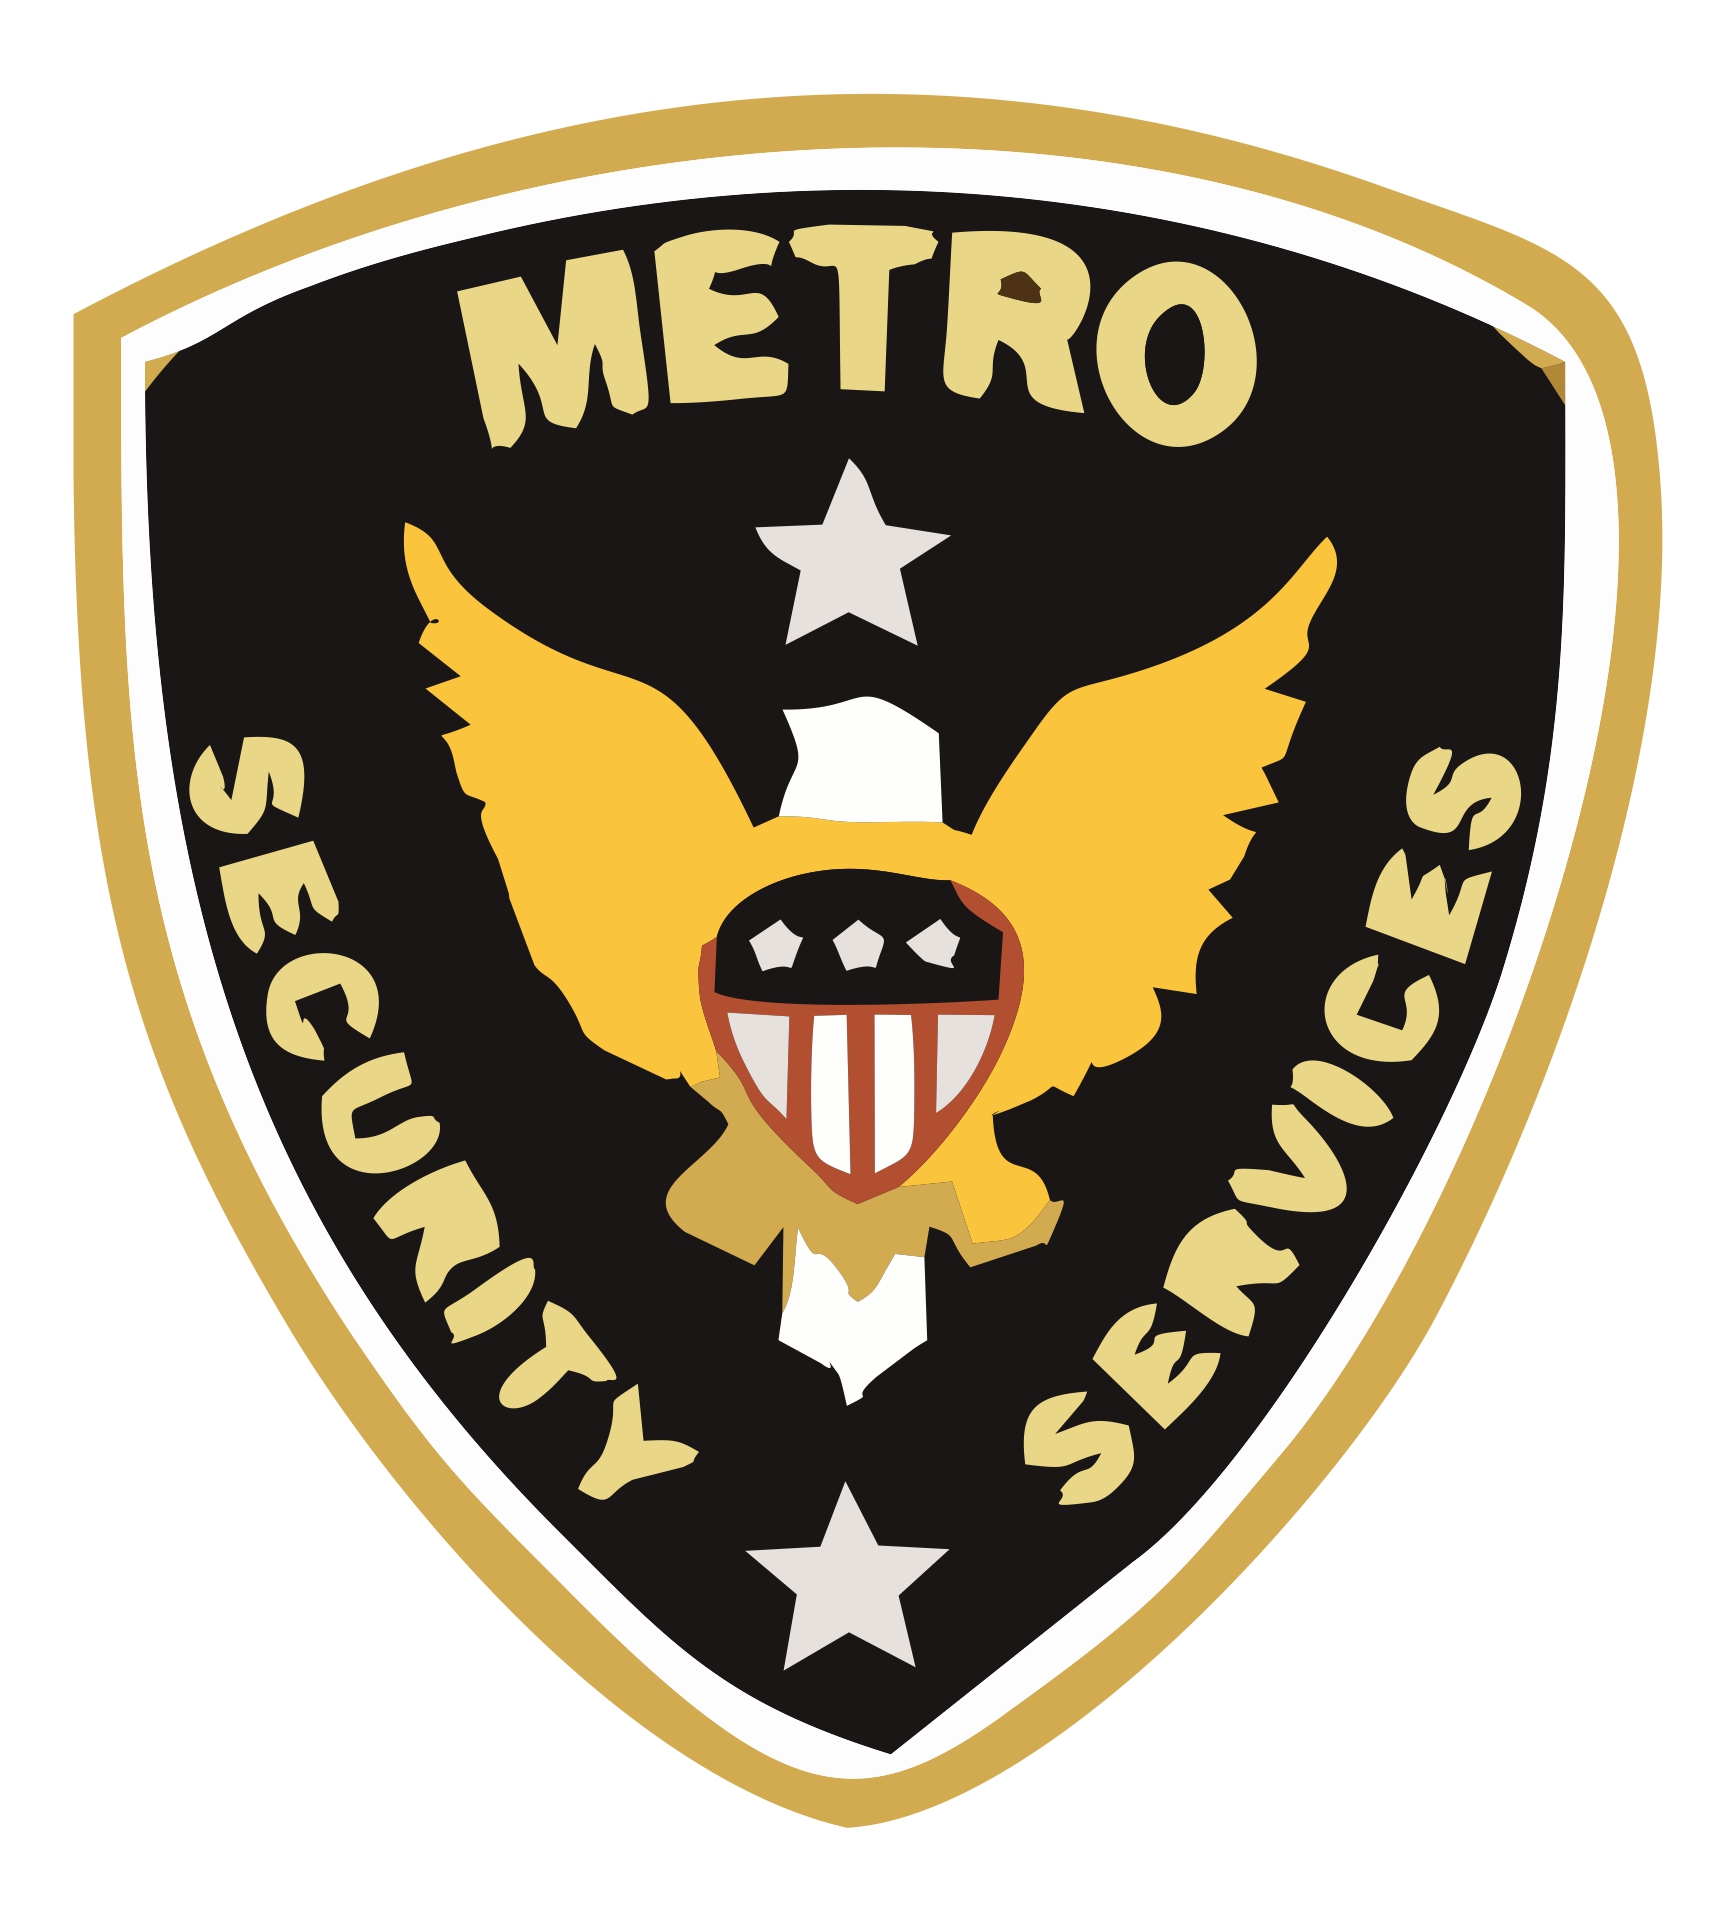 Metro Security Services is a Leading Private Security Company in London.